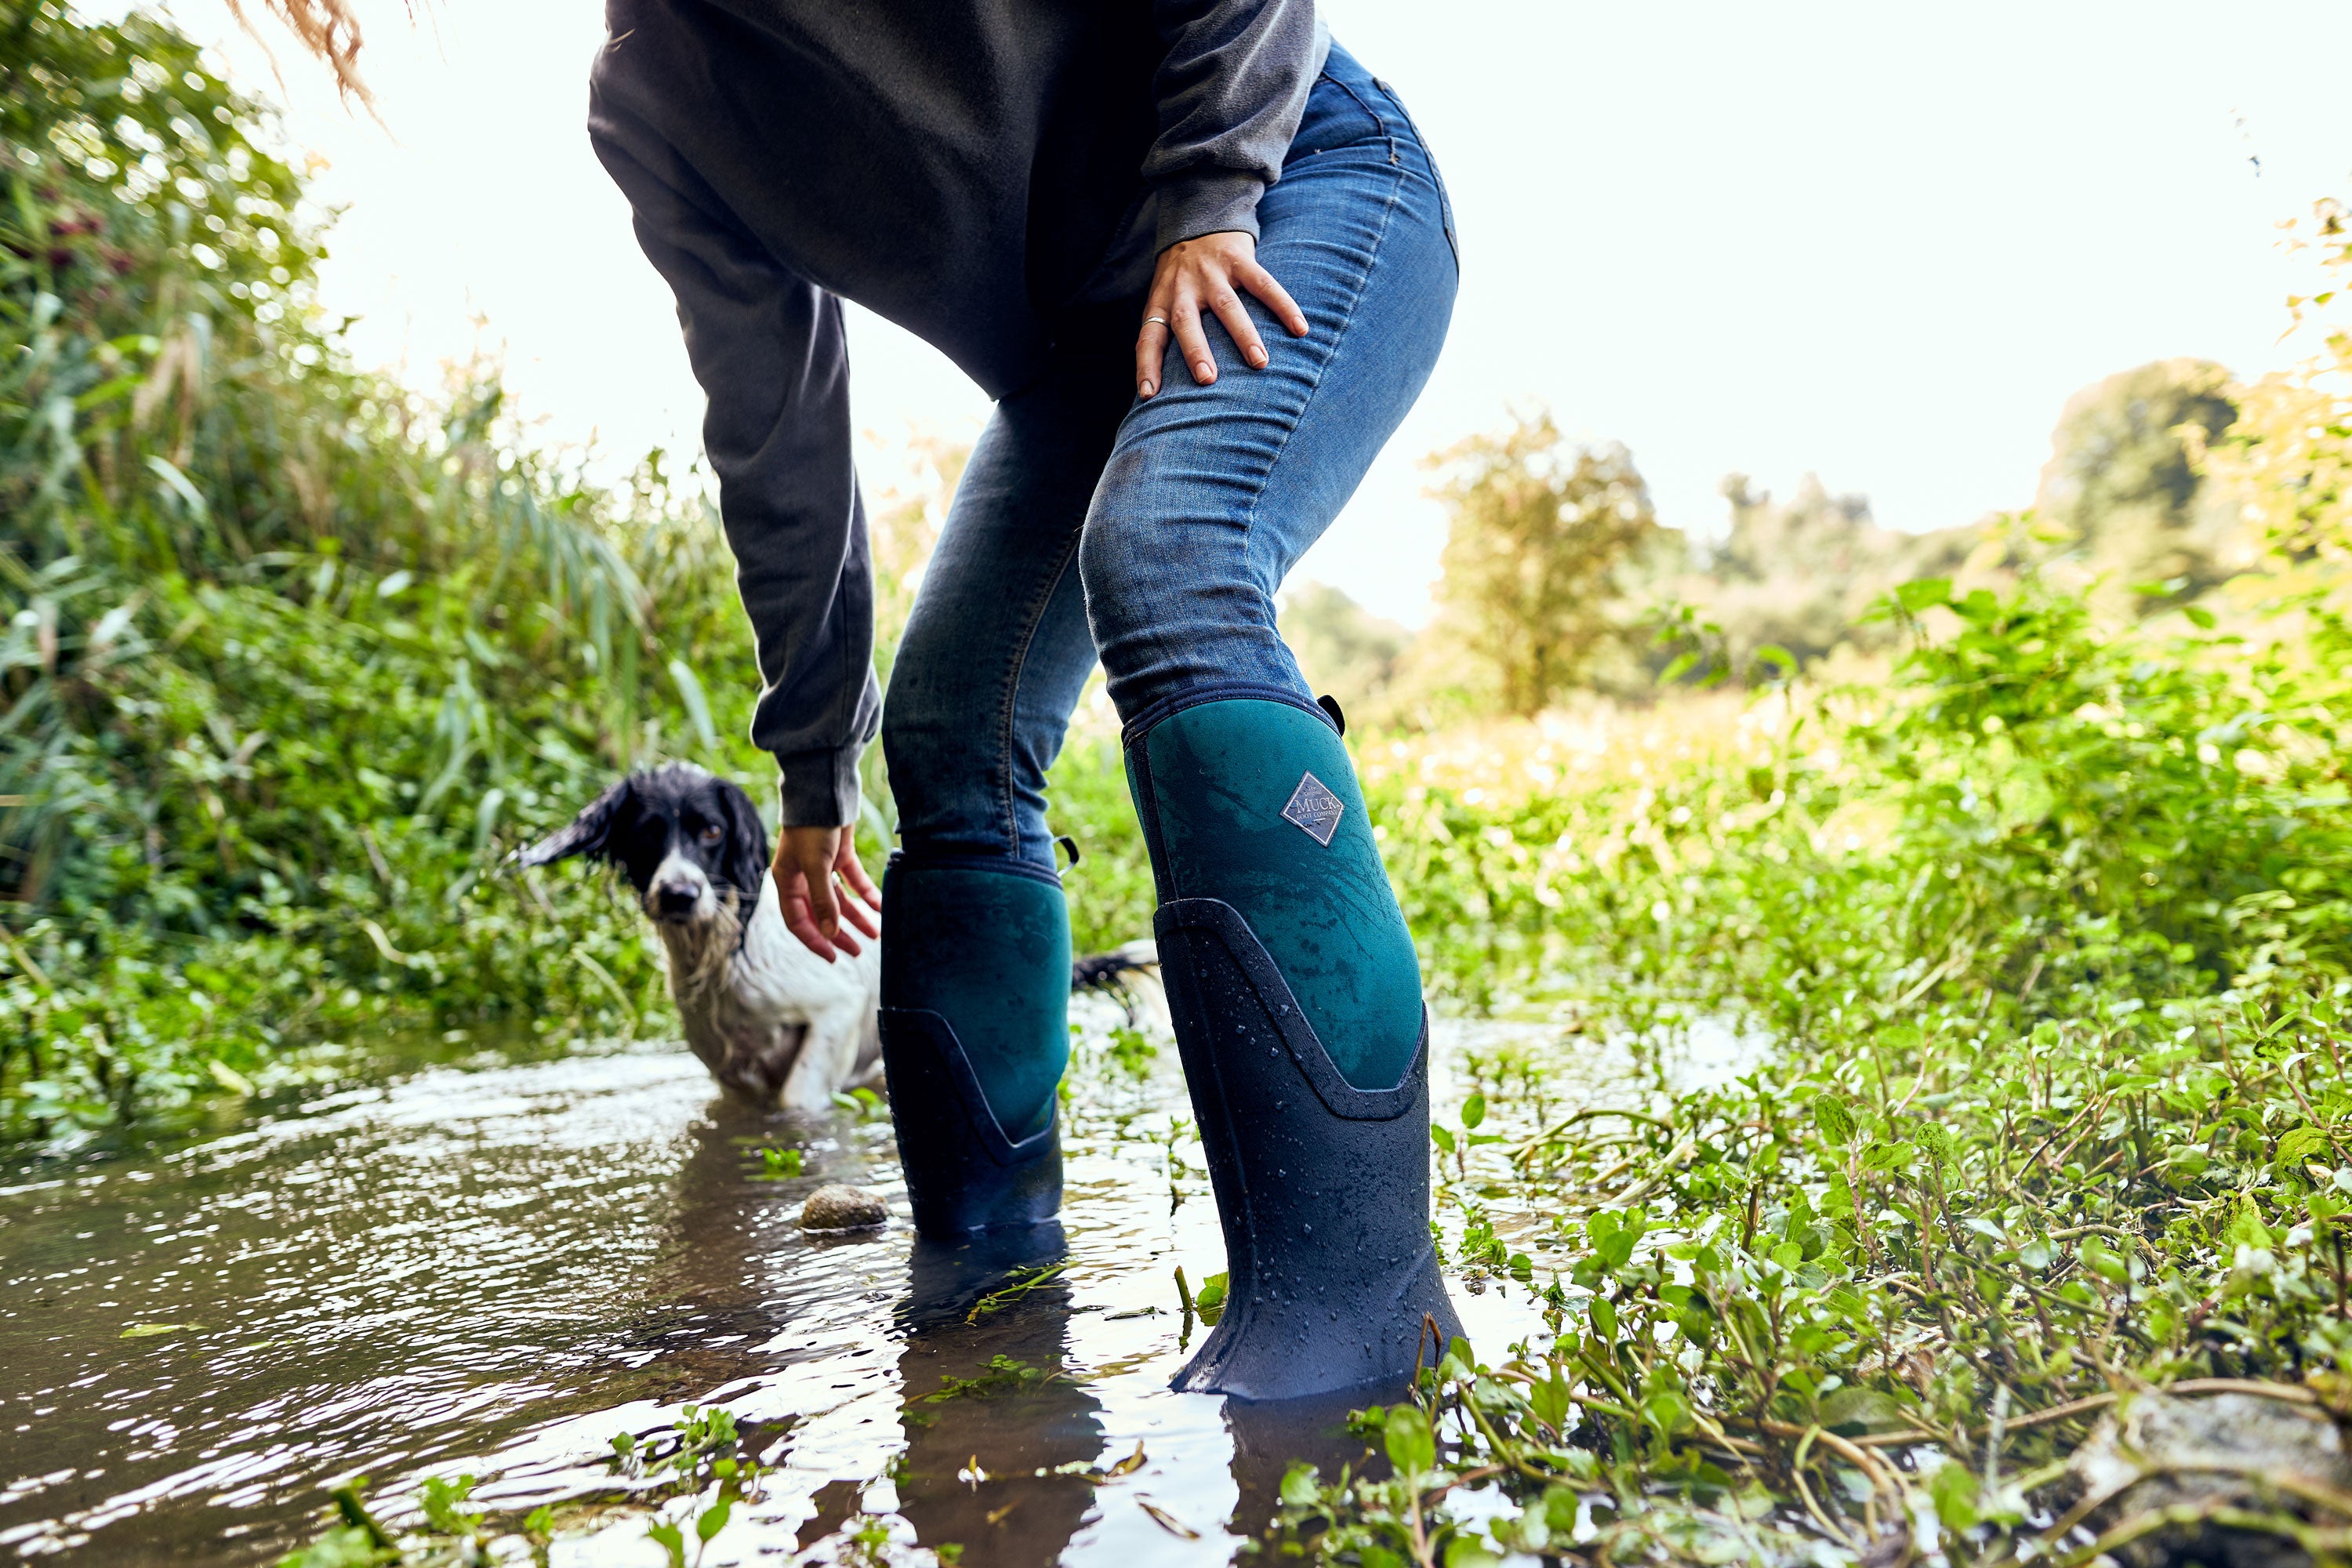 A woman wearing a pair of Muck Boots leaning over in a waterlogged path with vegetation  around her and a black and white dog in the background